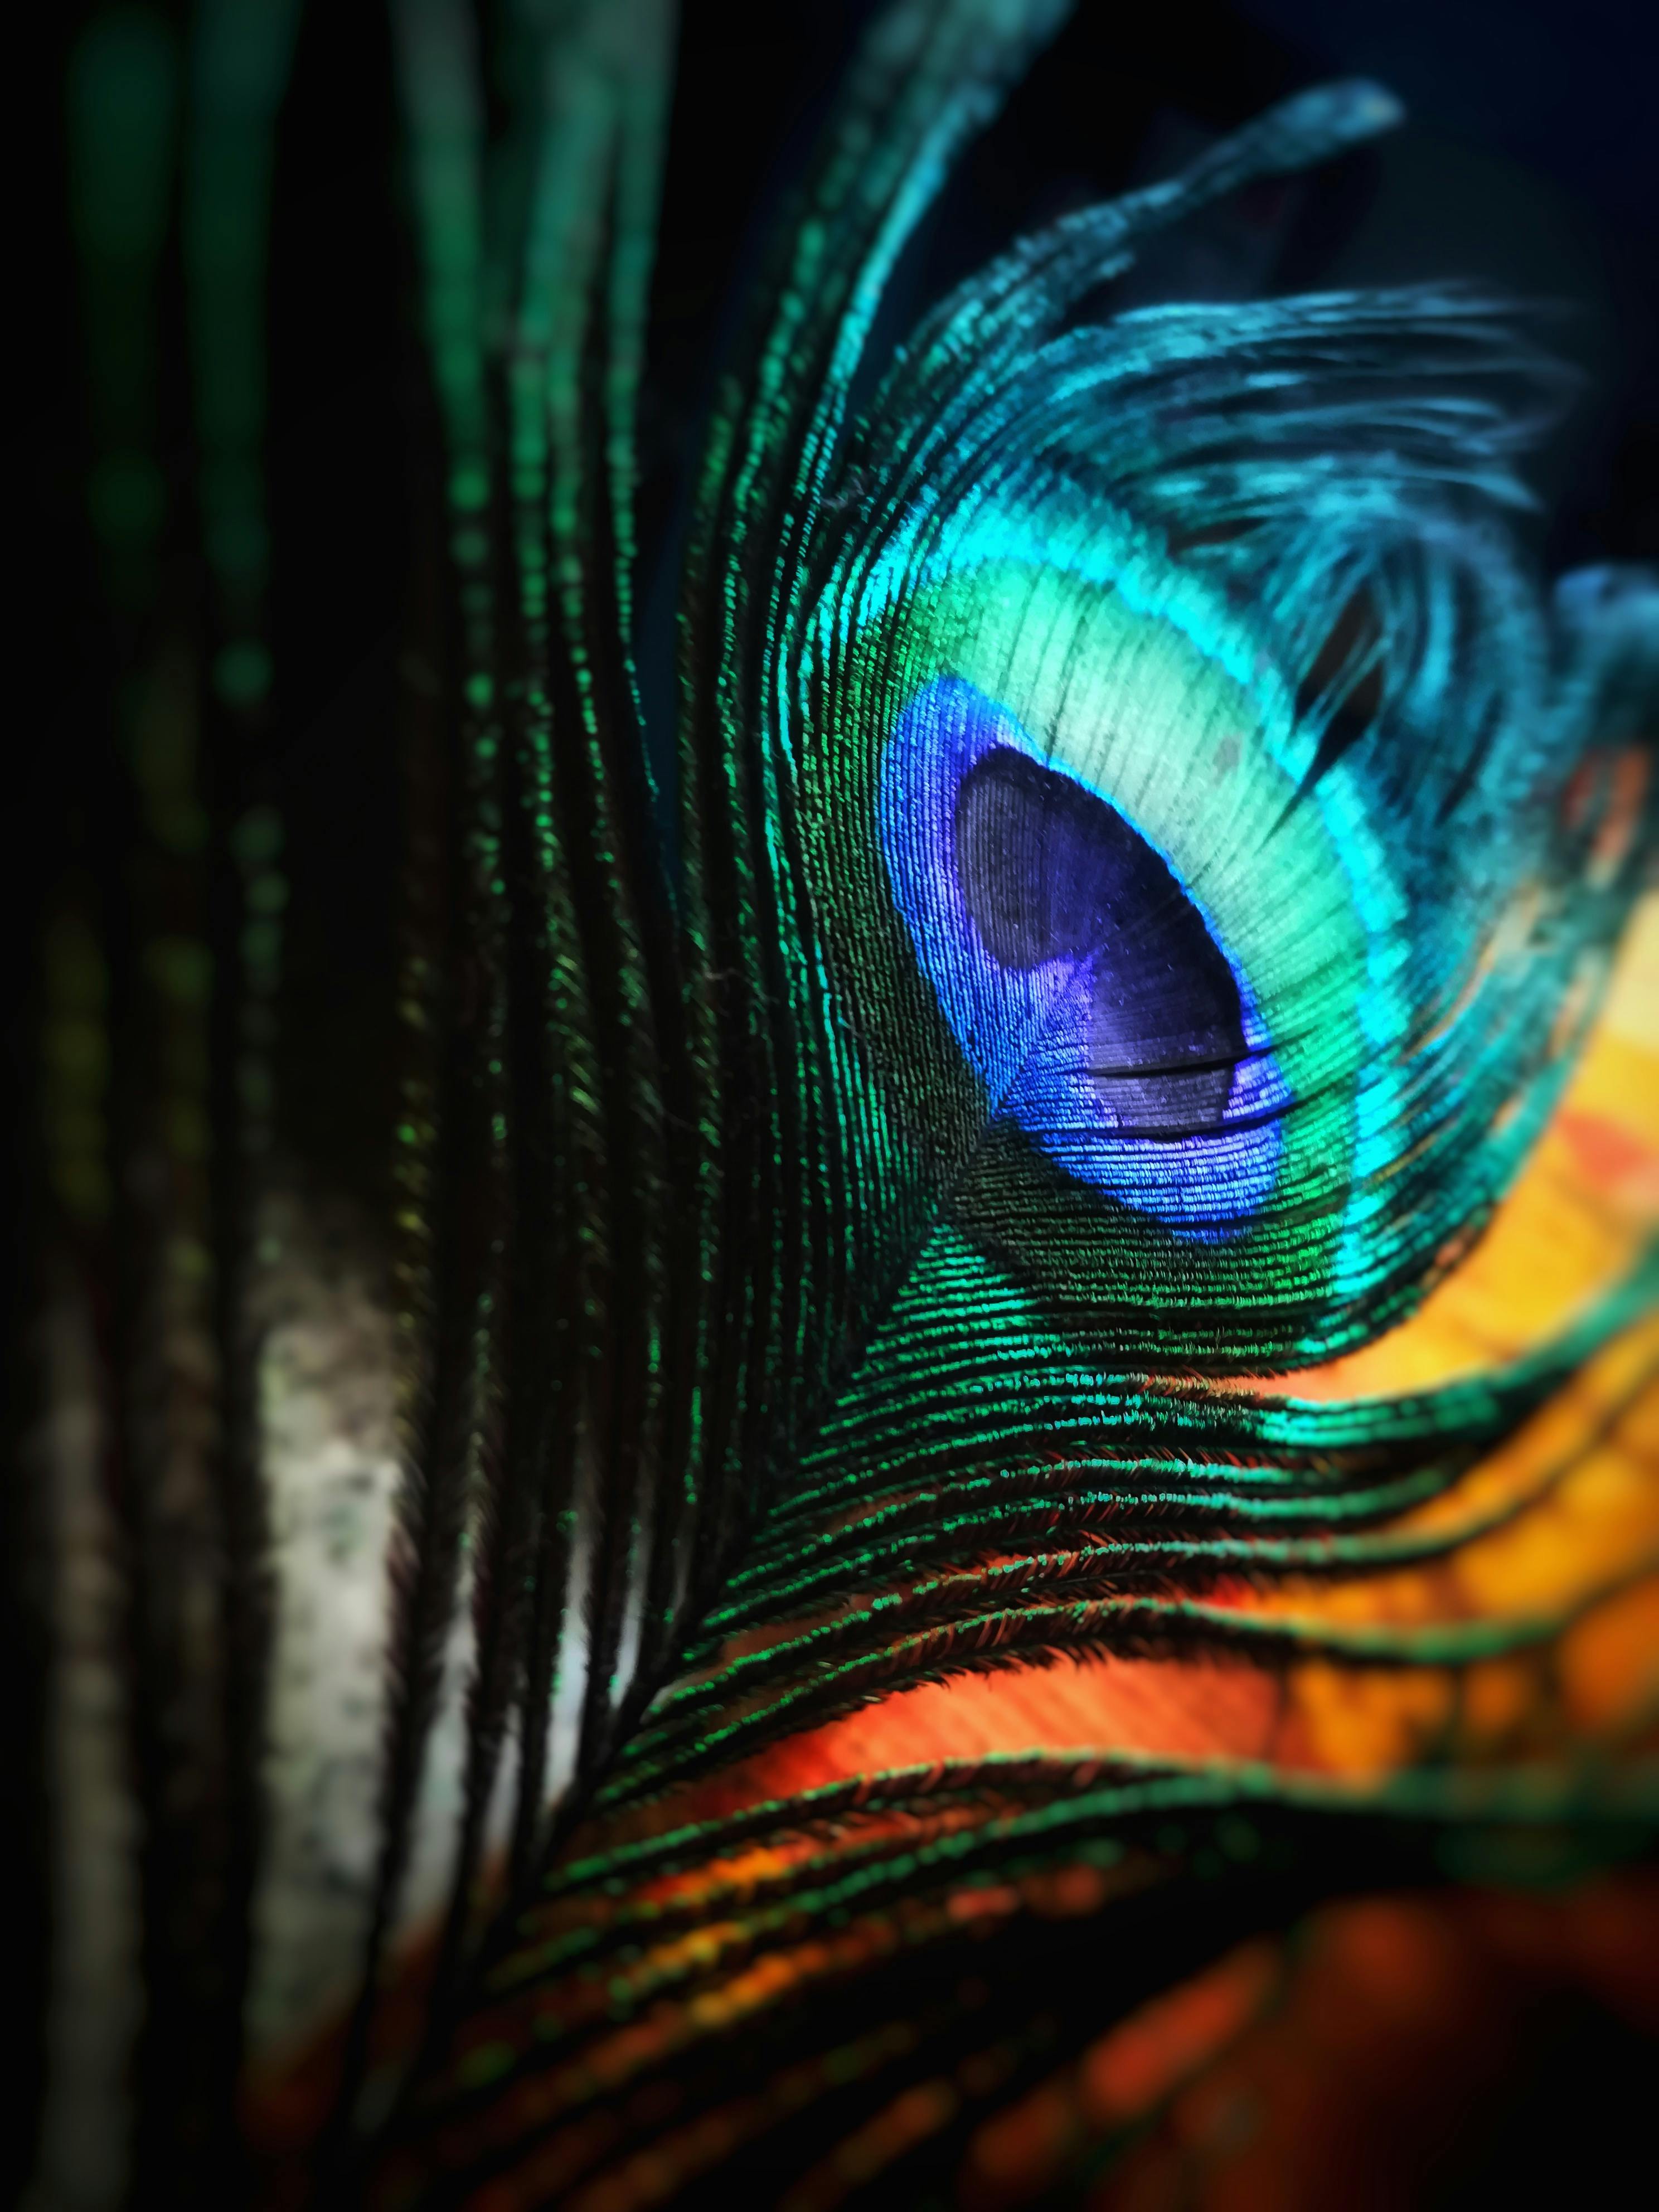 Green and Blue Peacock Feather · Free Stock Photo